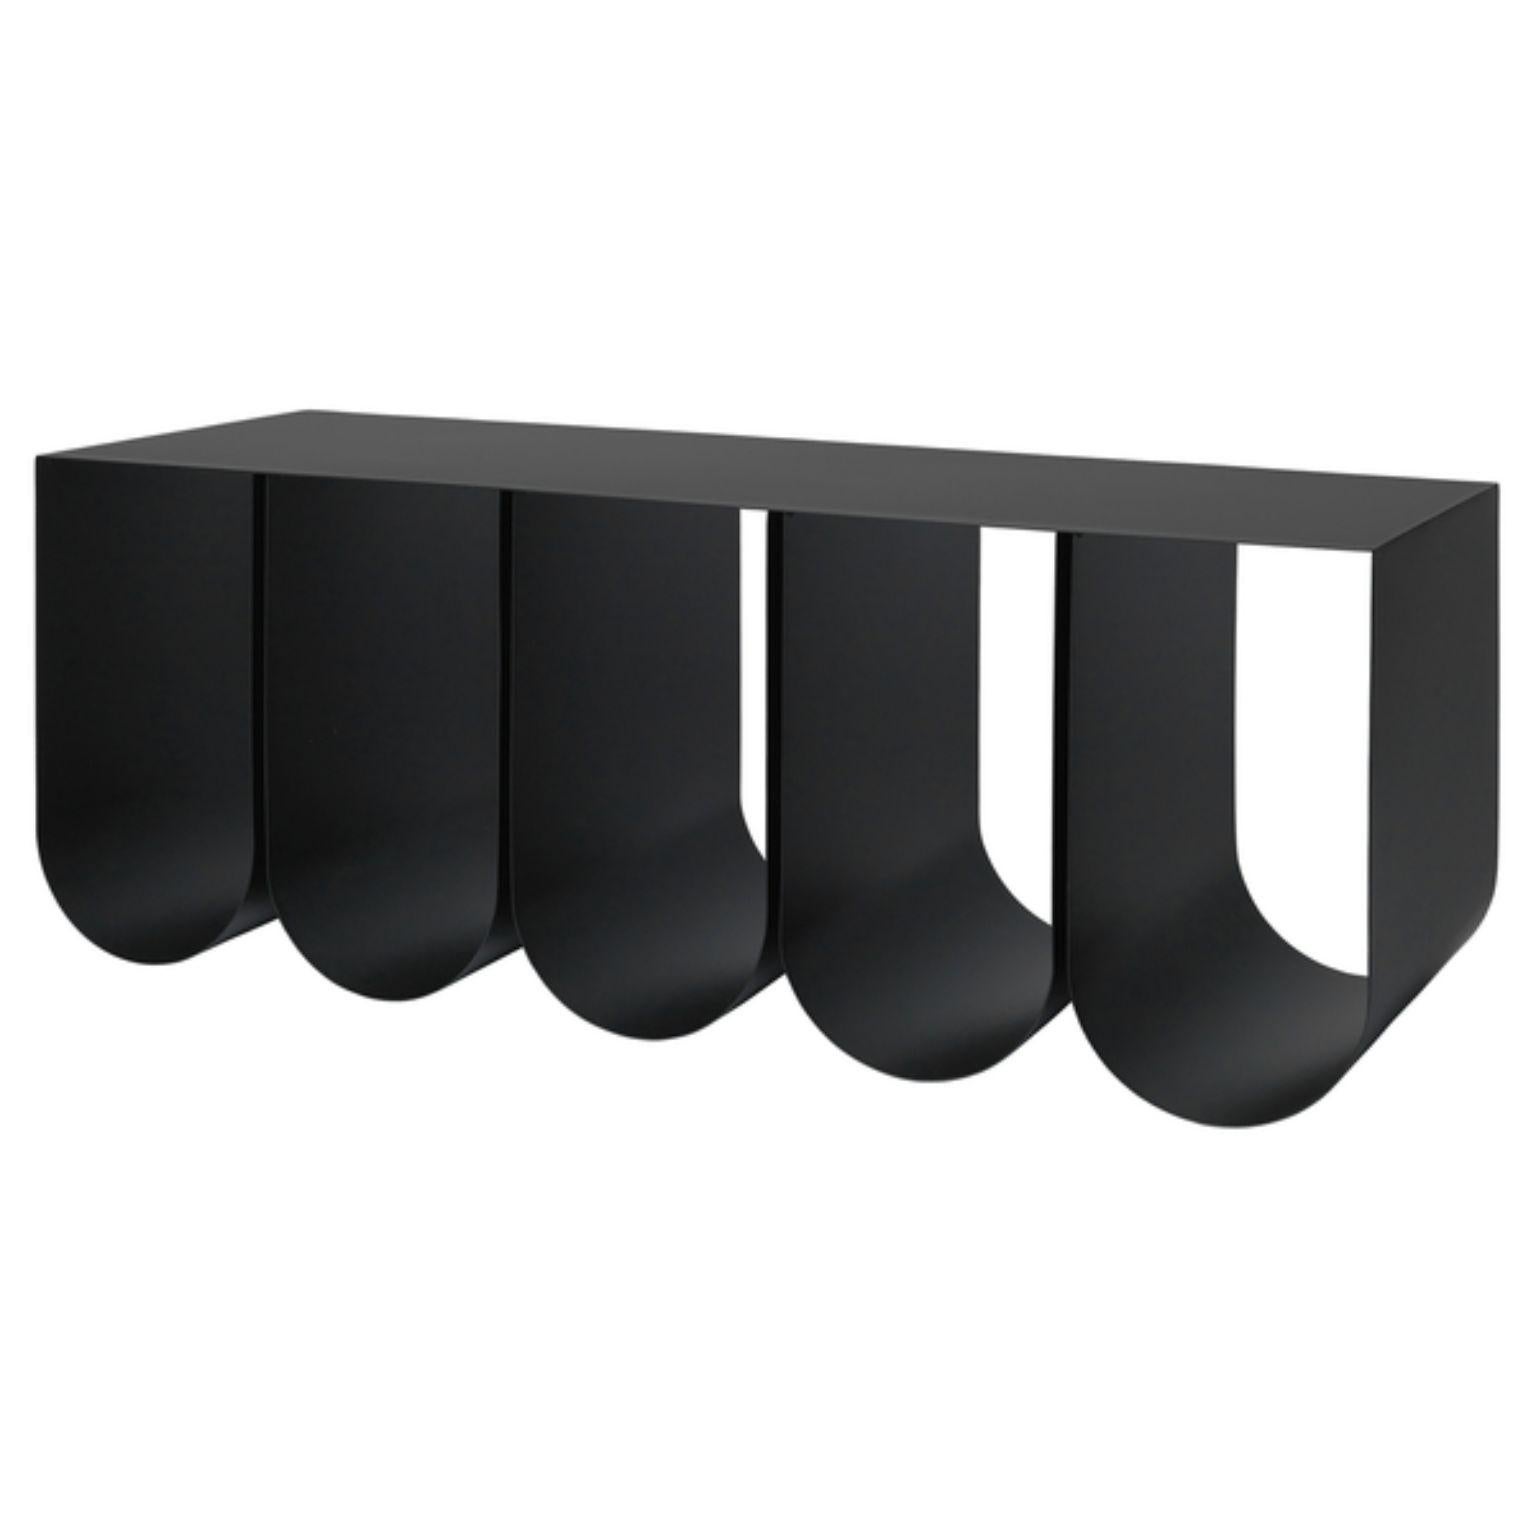 Black steel curved bench by Kristina Dam Studio
Materials: Black powder-coated steel
Dimensions: D 40 x W 110 x H 42 cm
35 kg

Dimensions cannot be customized.

*Safe to use outdoor.

Kristina Dam graduated from The Royal Danish School of Fine Arts,